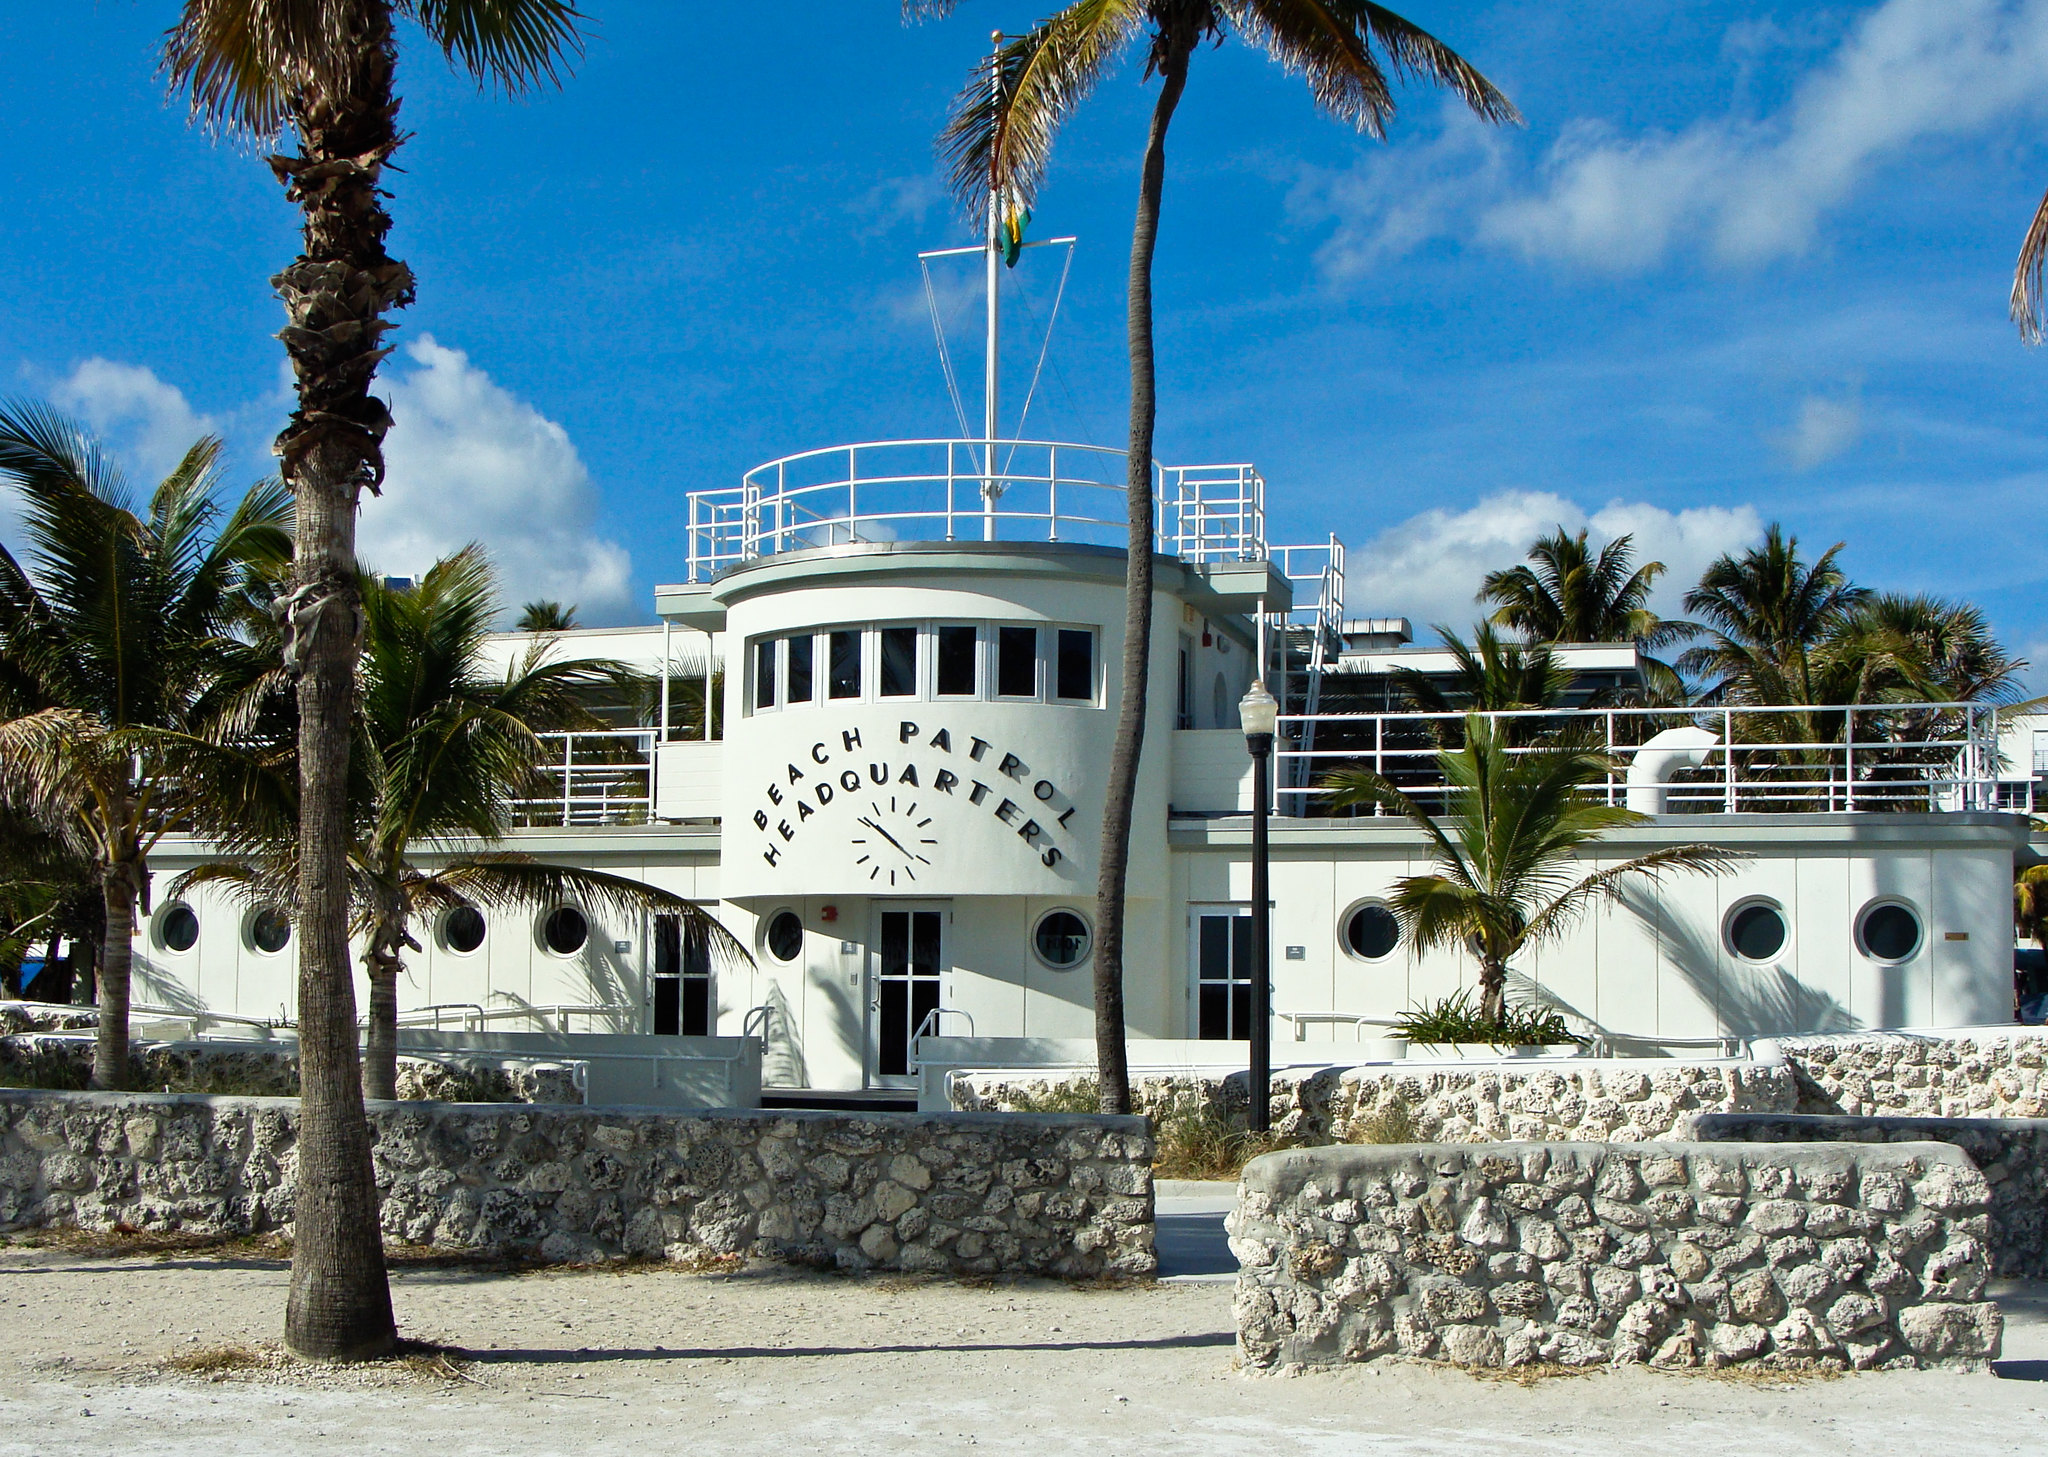 White Miami ocean rescue art deco building that reads "Beach Patrol Headquarters" on the front